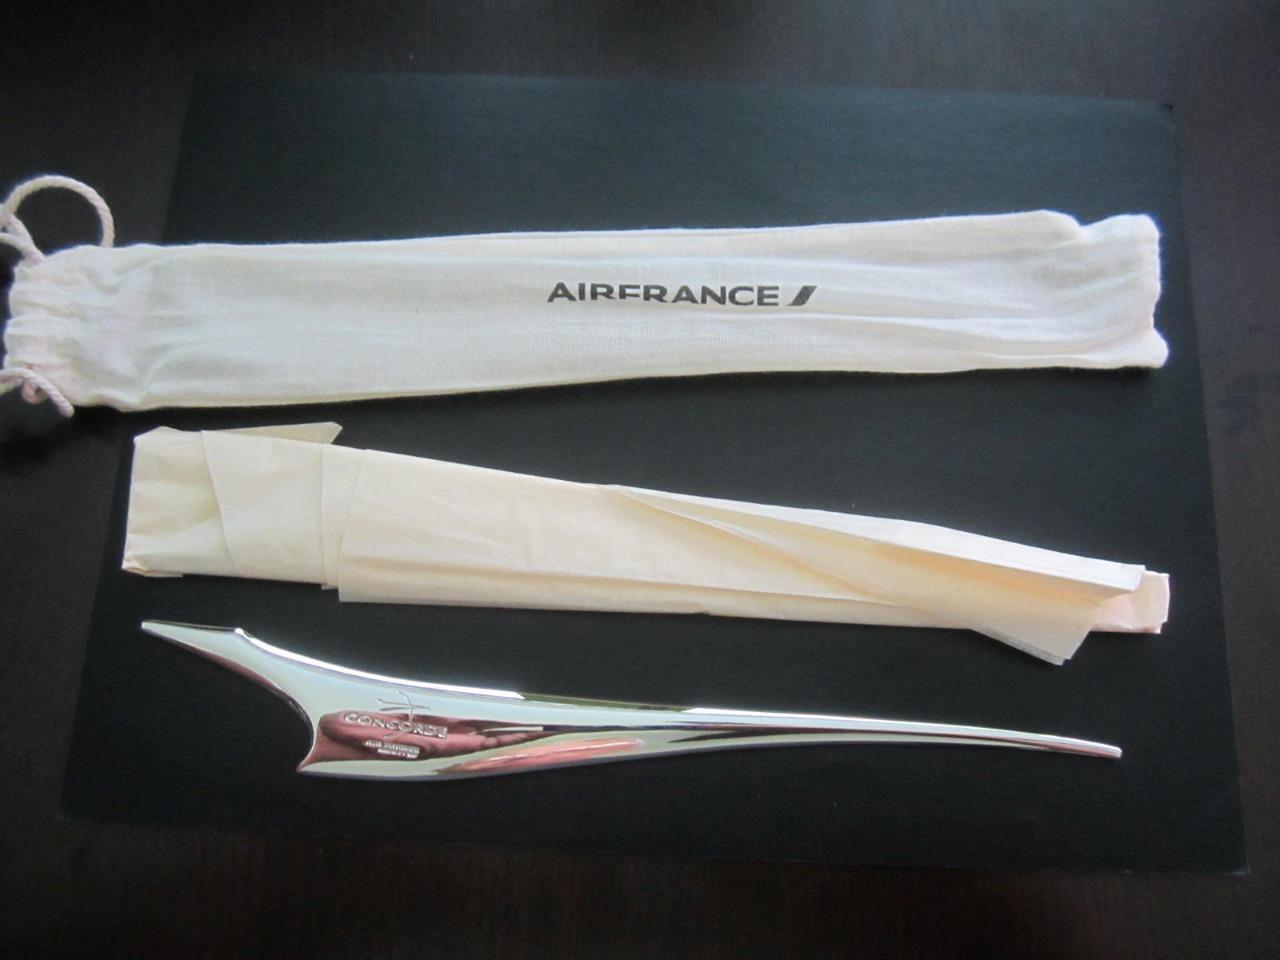 AIR FRANCE CONCORDE AIRPLANE CHROME METAL LETTER OPENER GIFT NEW IN POUCH RARE